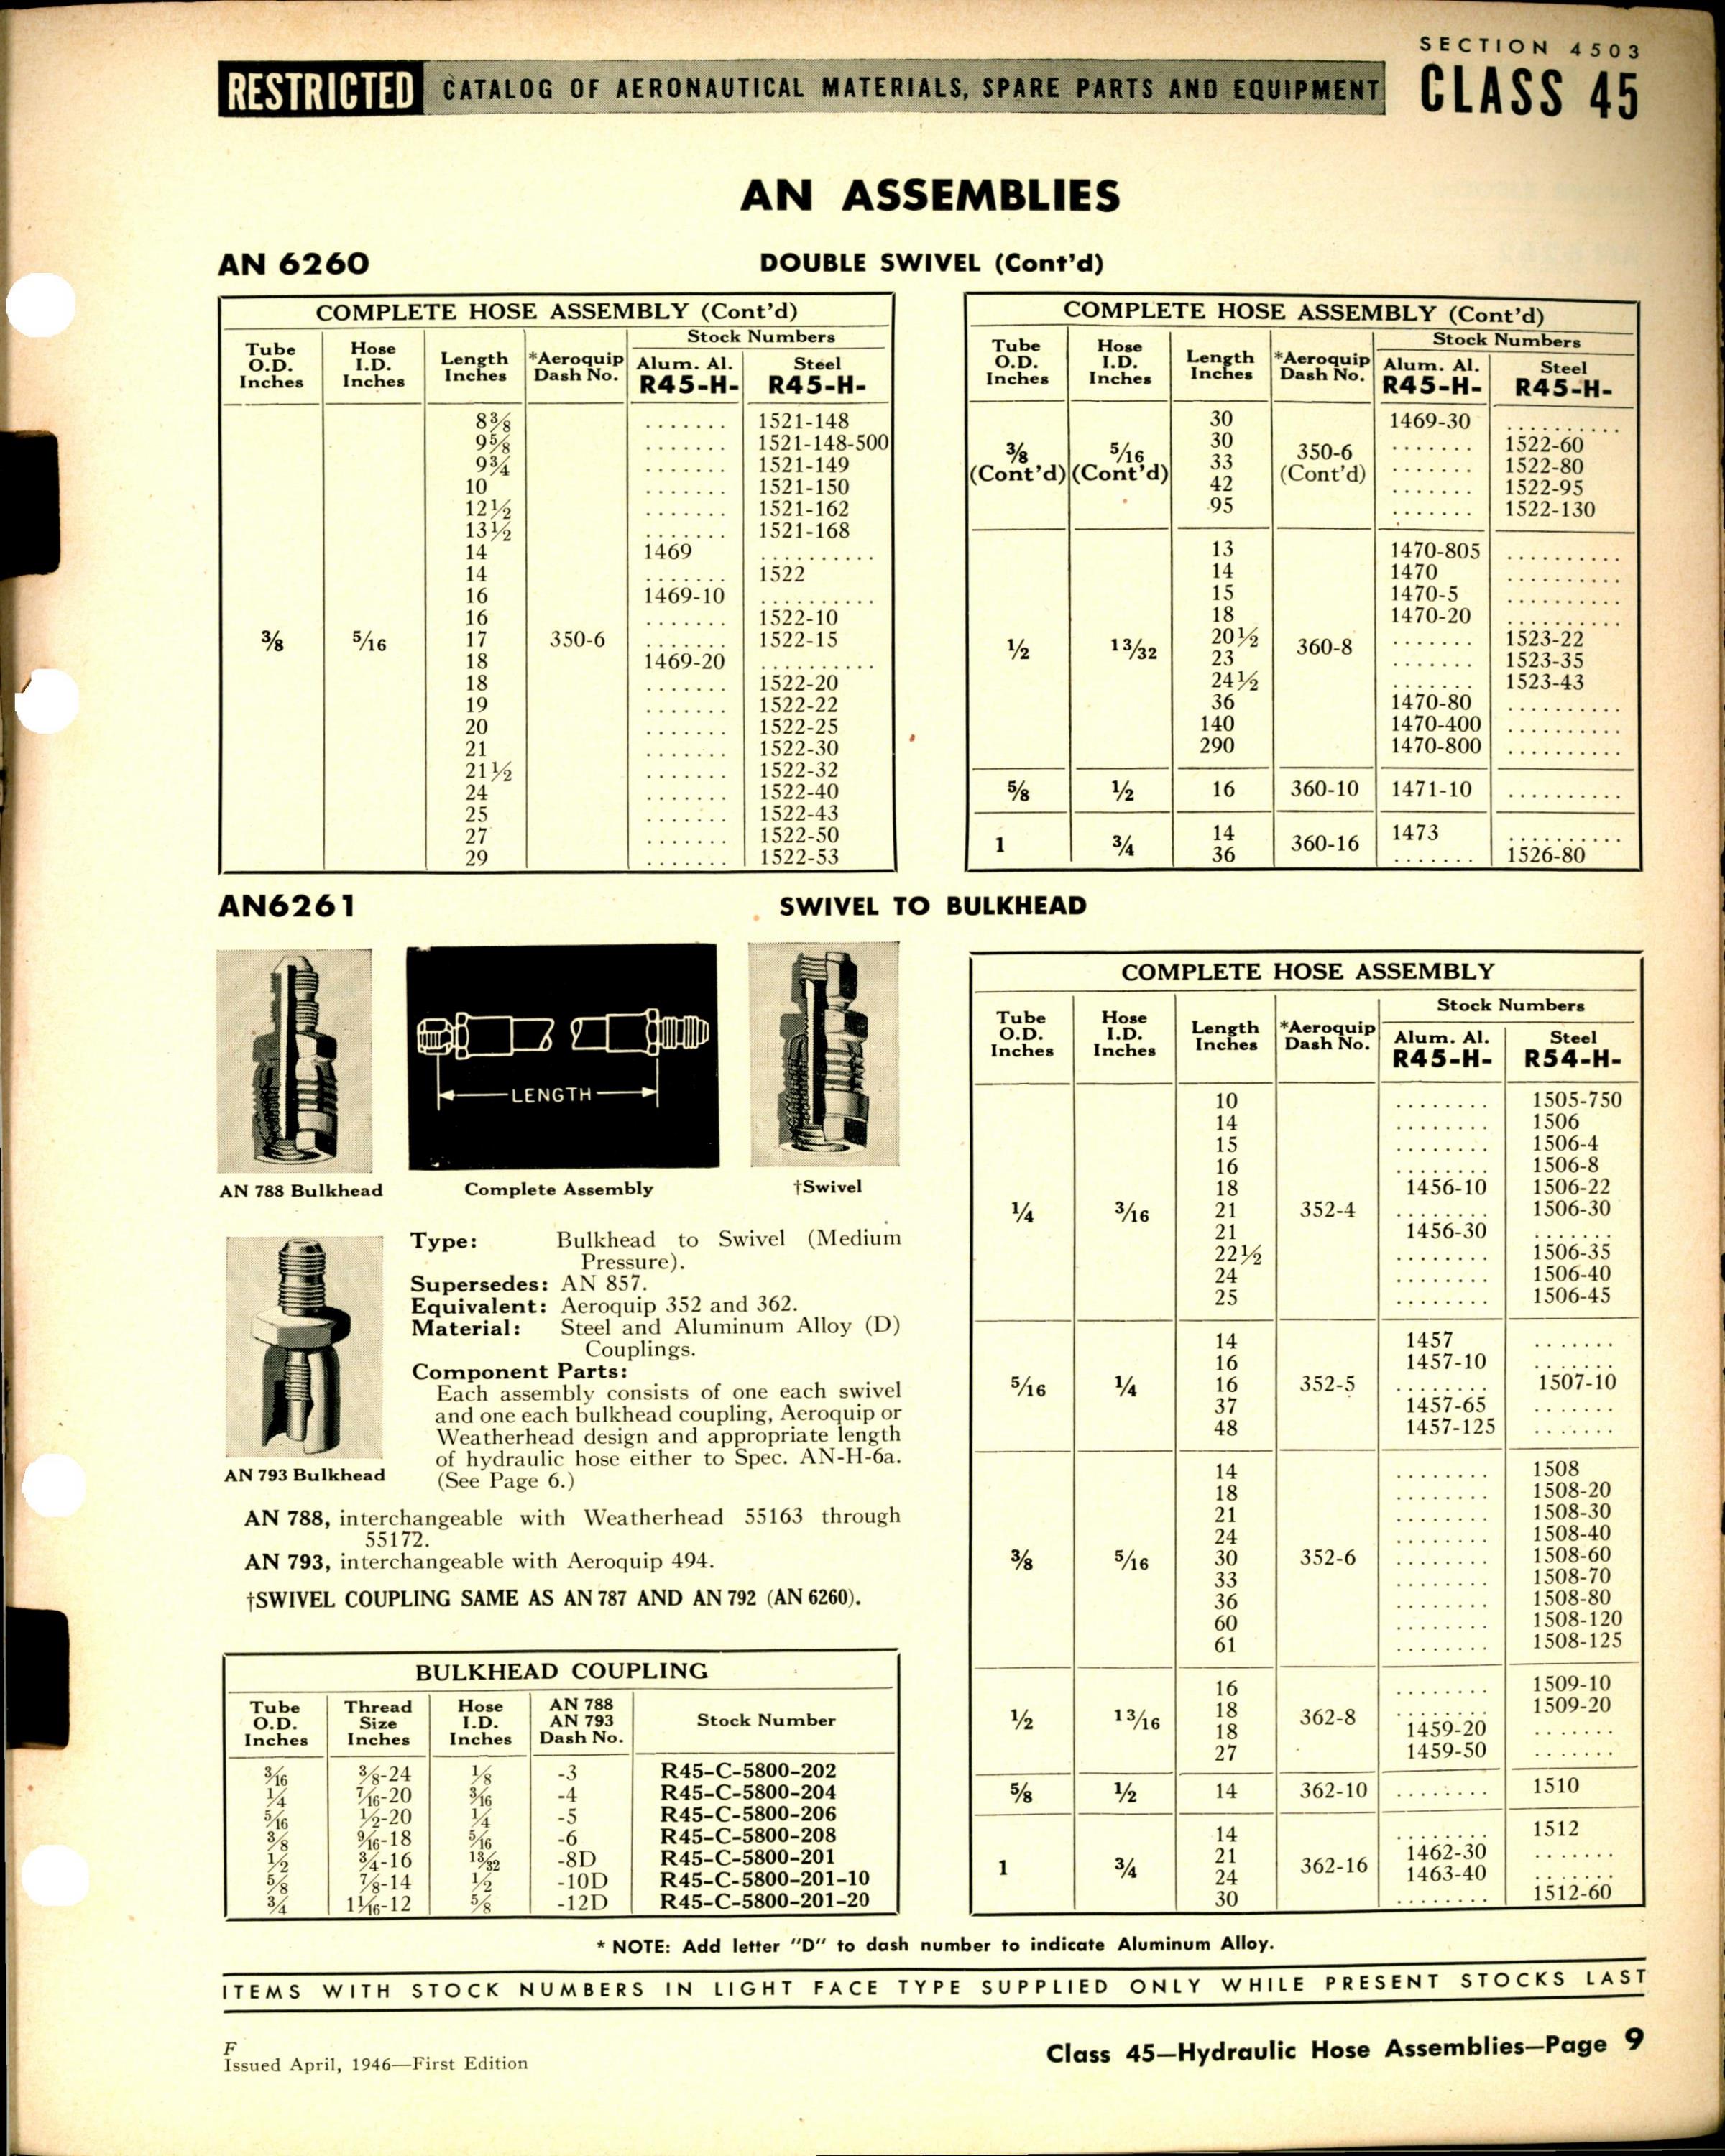 Sample page 9 from AirCorps Library document: Hydraulic Hose Fittings and Assemblies